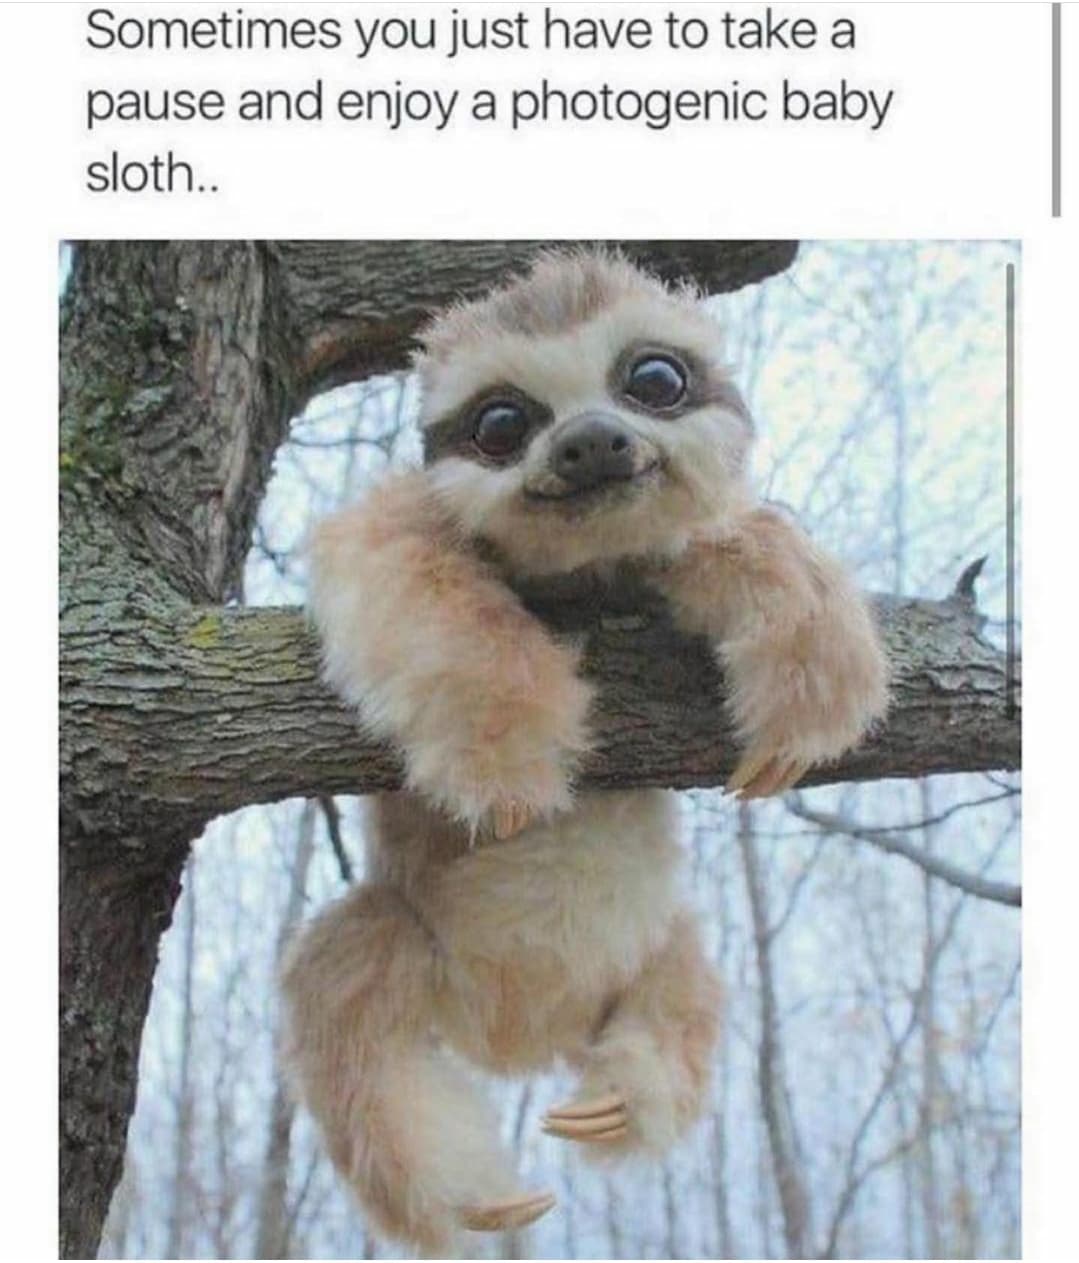 photogenic baby sloth - Sometimes you just have to take a pause and enjoy a photogenic baby sloth..